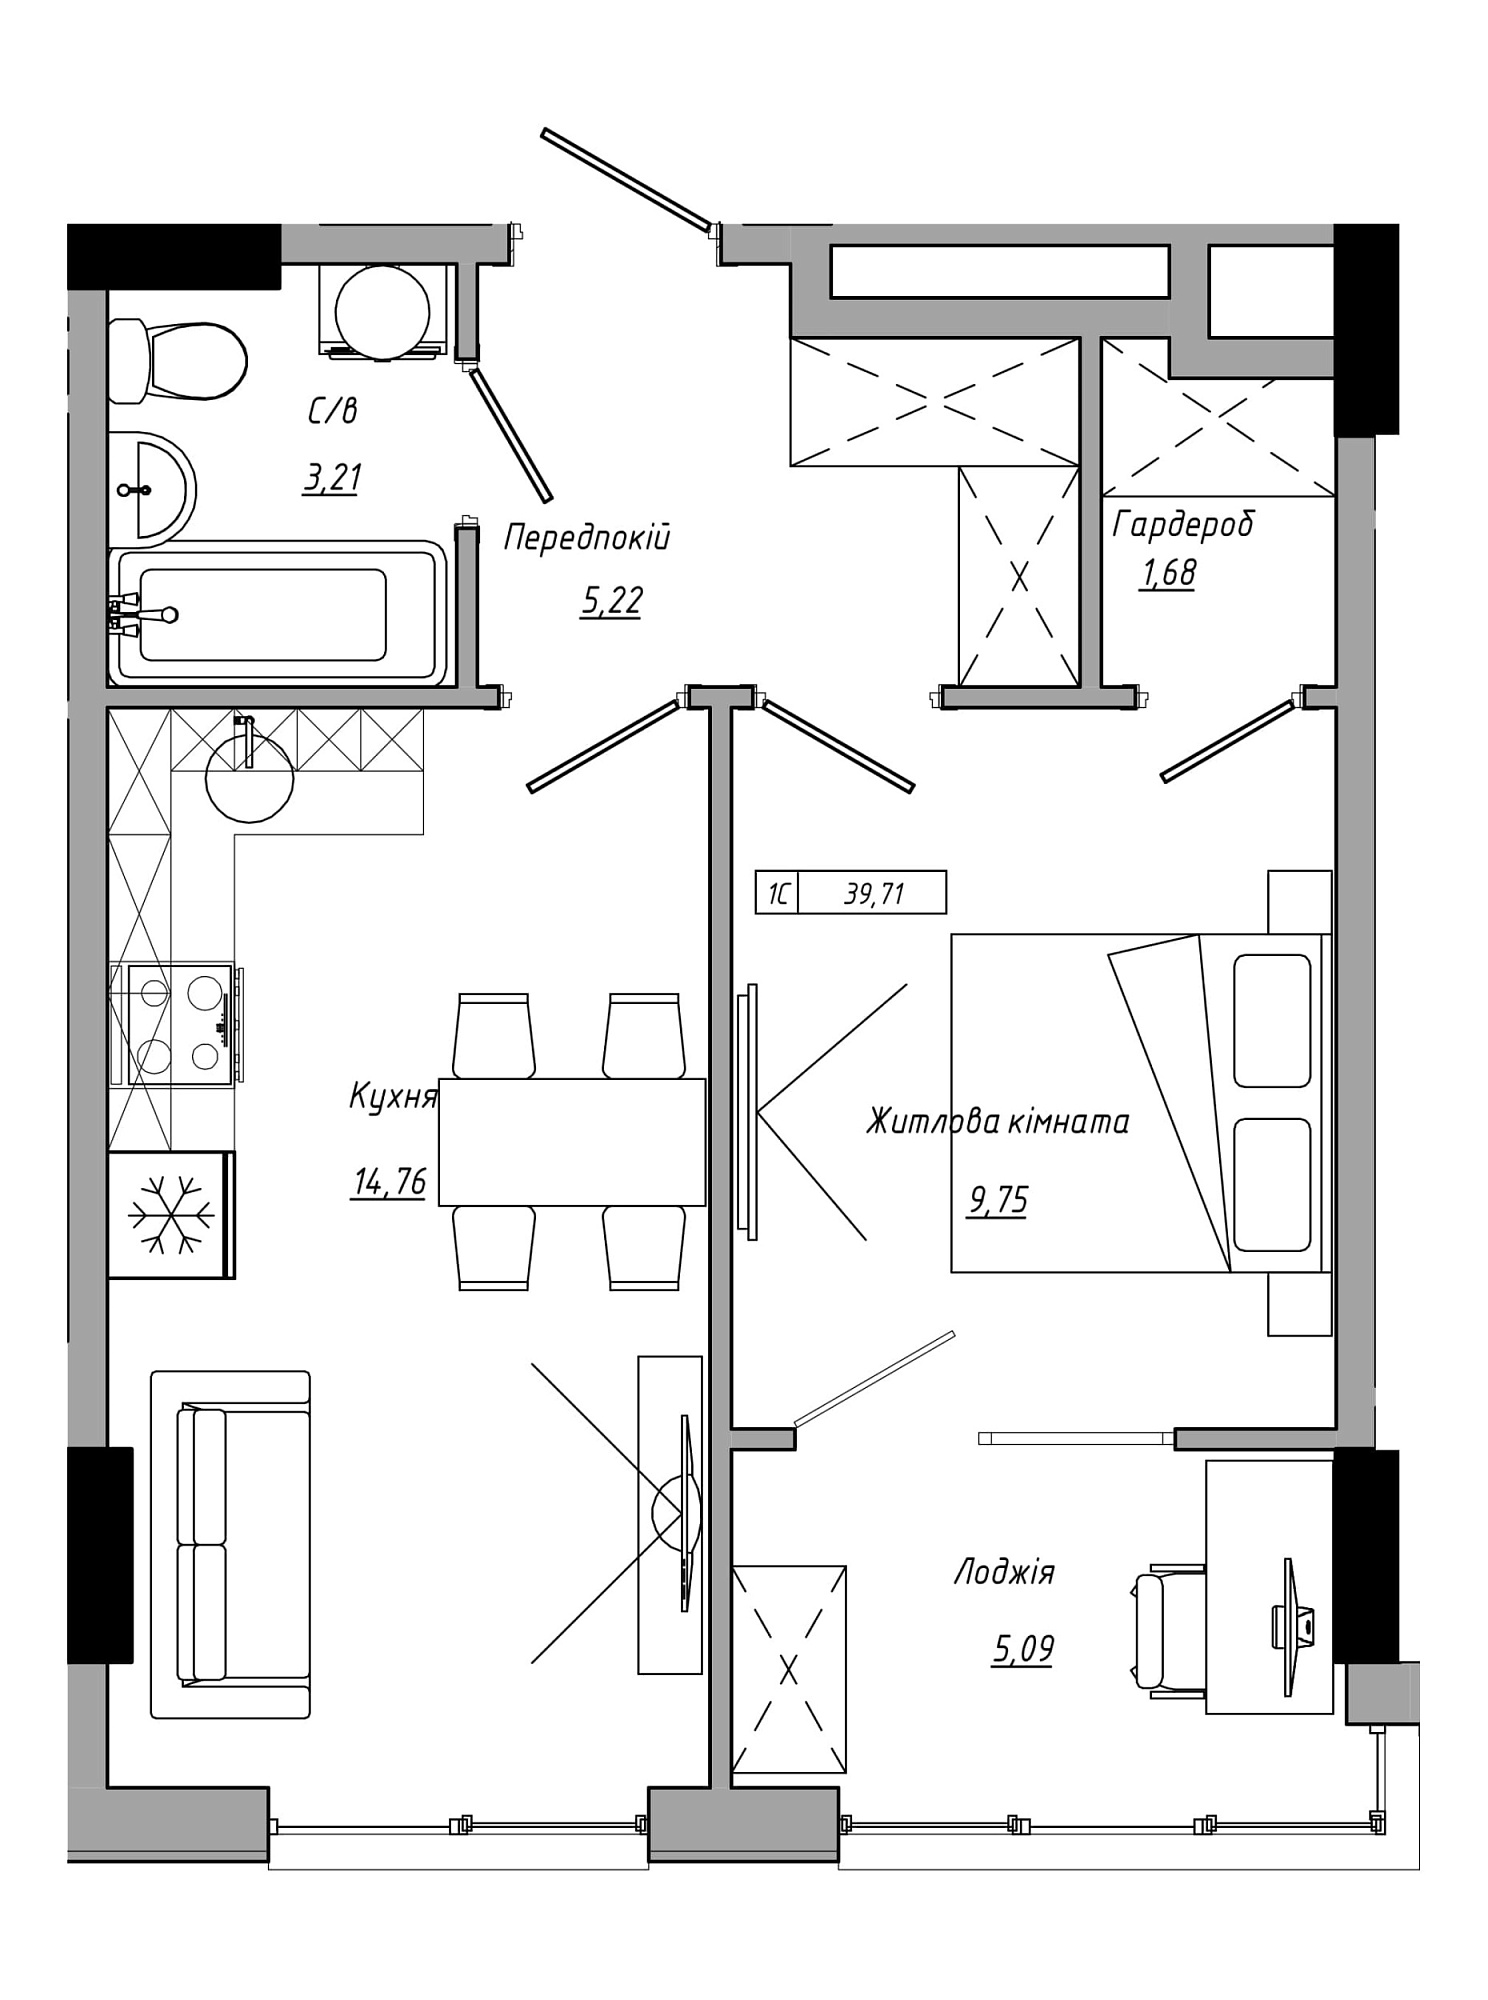 Planning 1-rm flats area 39.71m2, AB-21-11/00021.